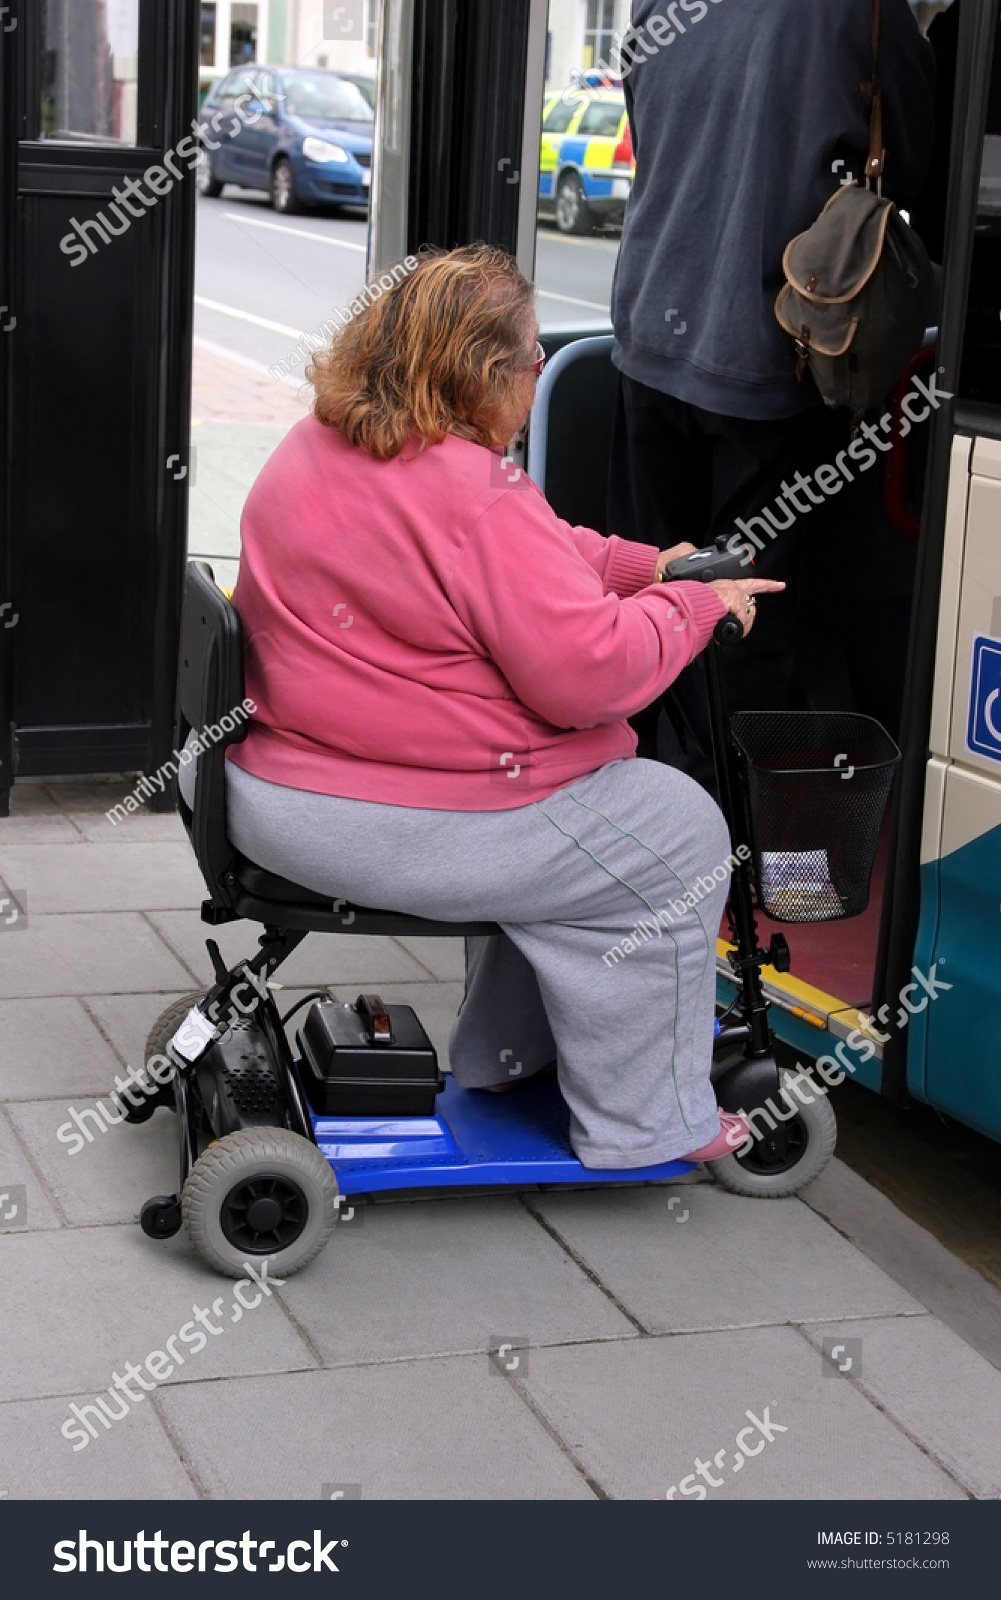 electric scooter for overweight